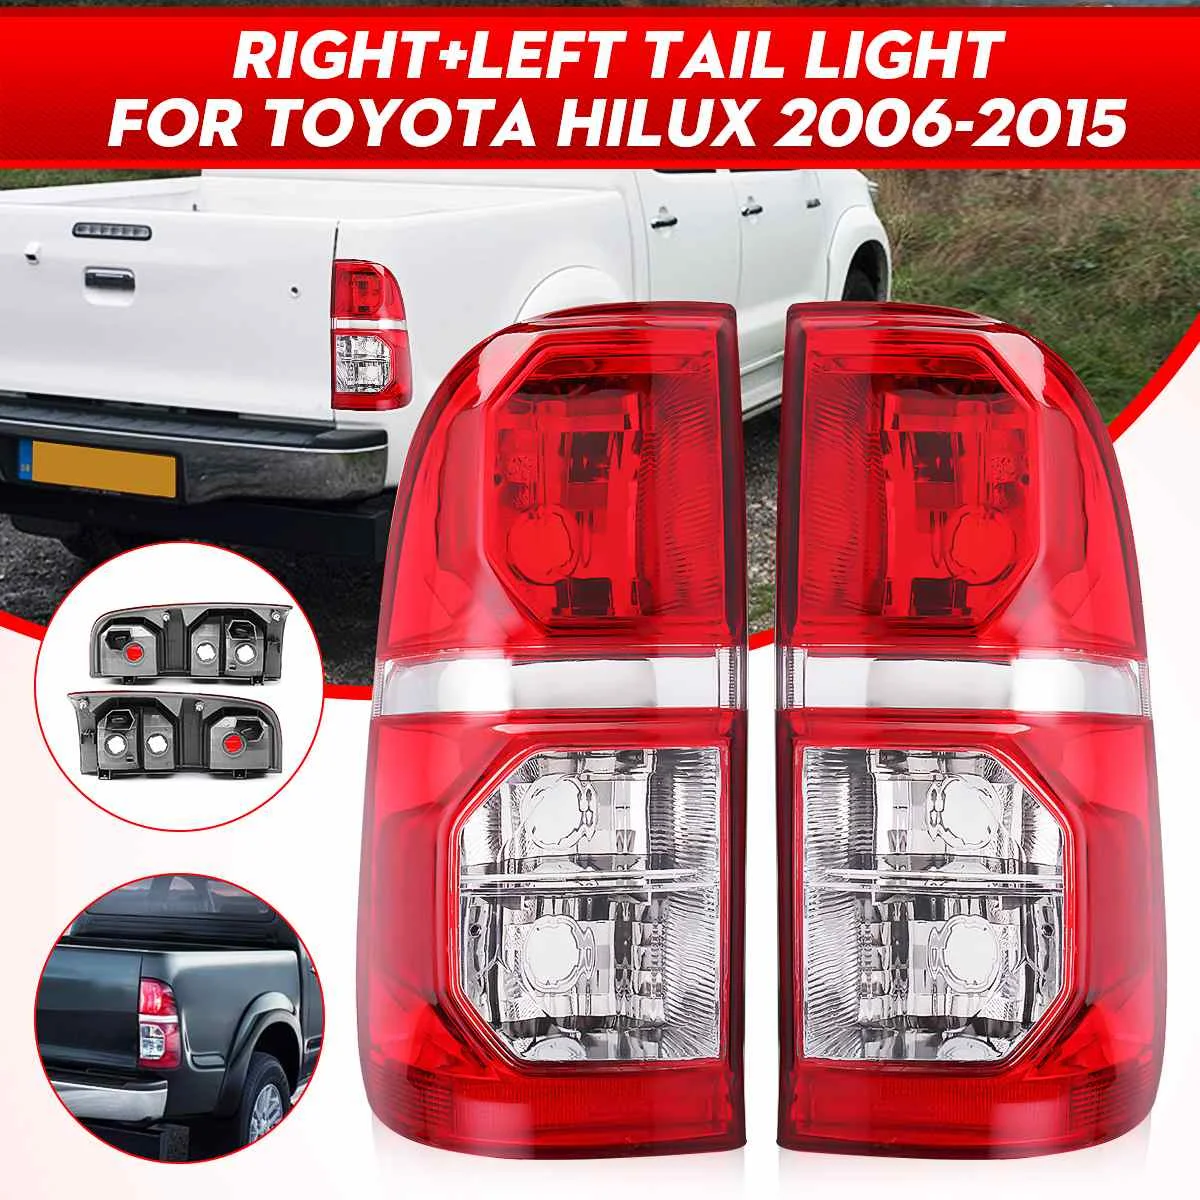 Pair Car Rear Tail Light Brake Lamp Taillight Signal For Toyota Hilux 2005 2006 2007 2008 2009 2010 2011 2012 2013 2014 2015